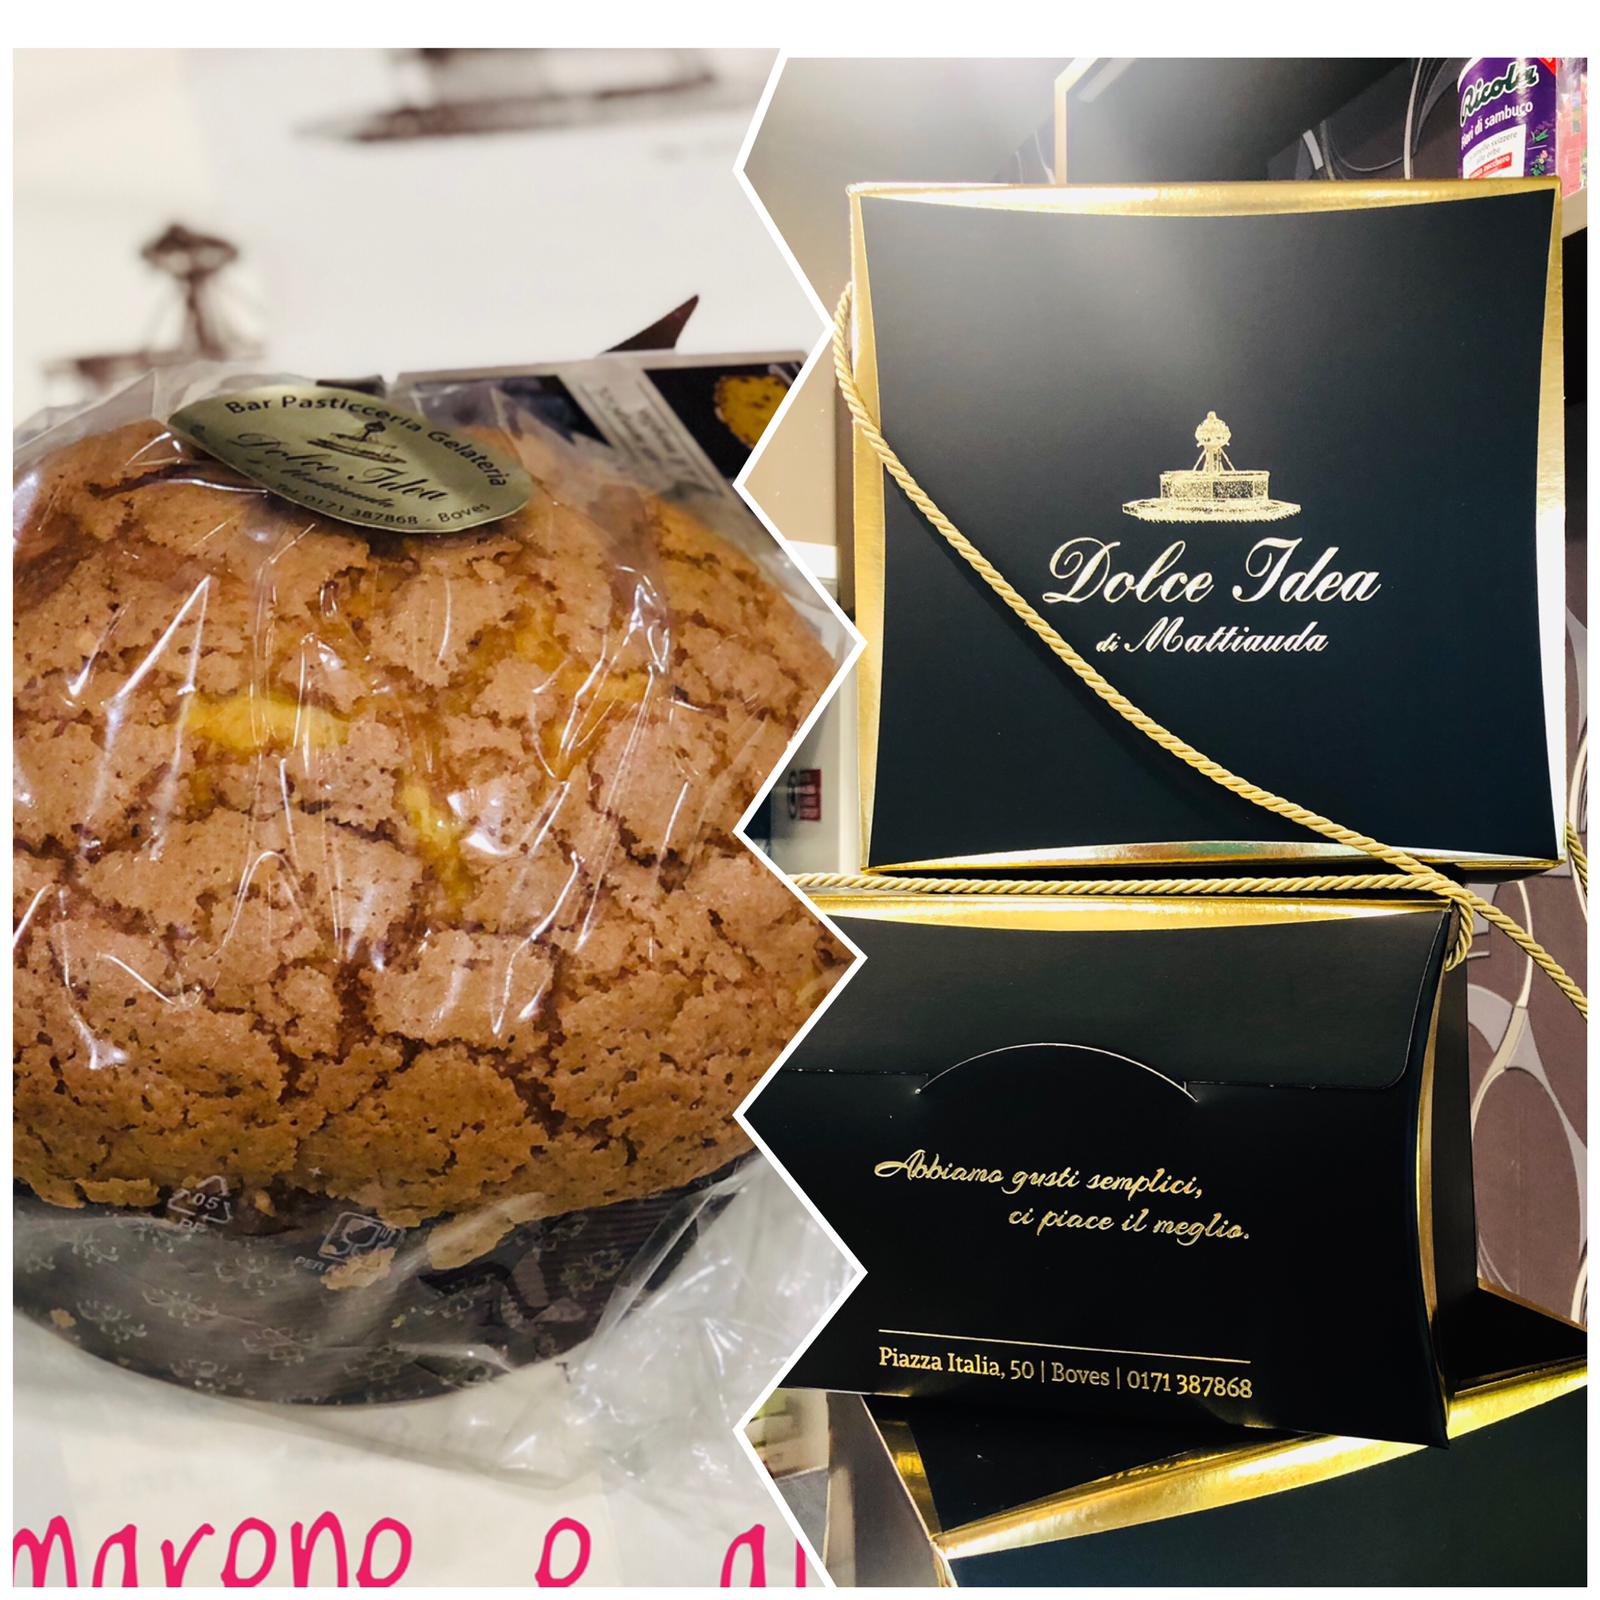 PANETTONE ONLY TASTING BOX - (3 Panettoni all different flavors)